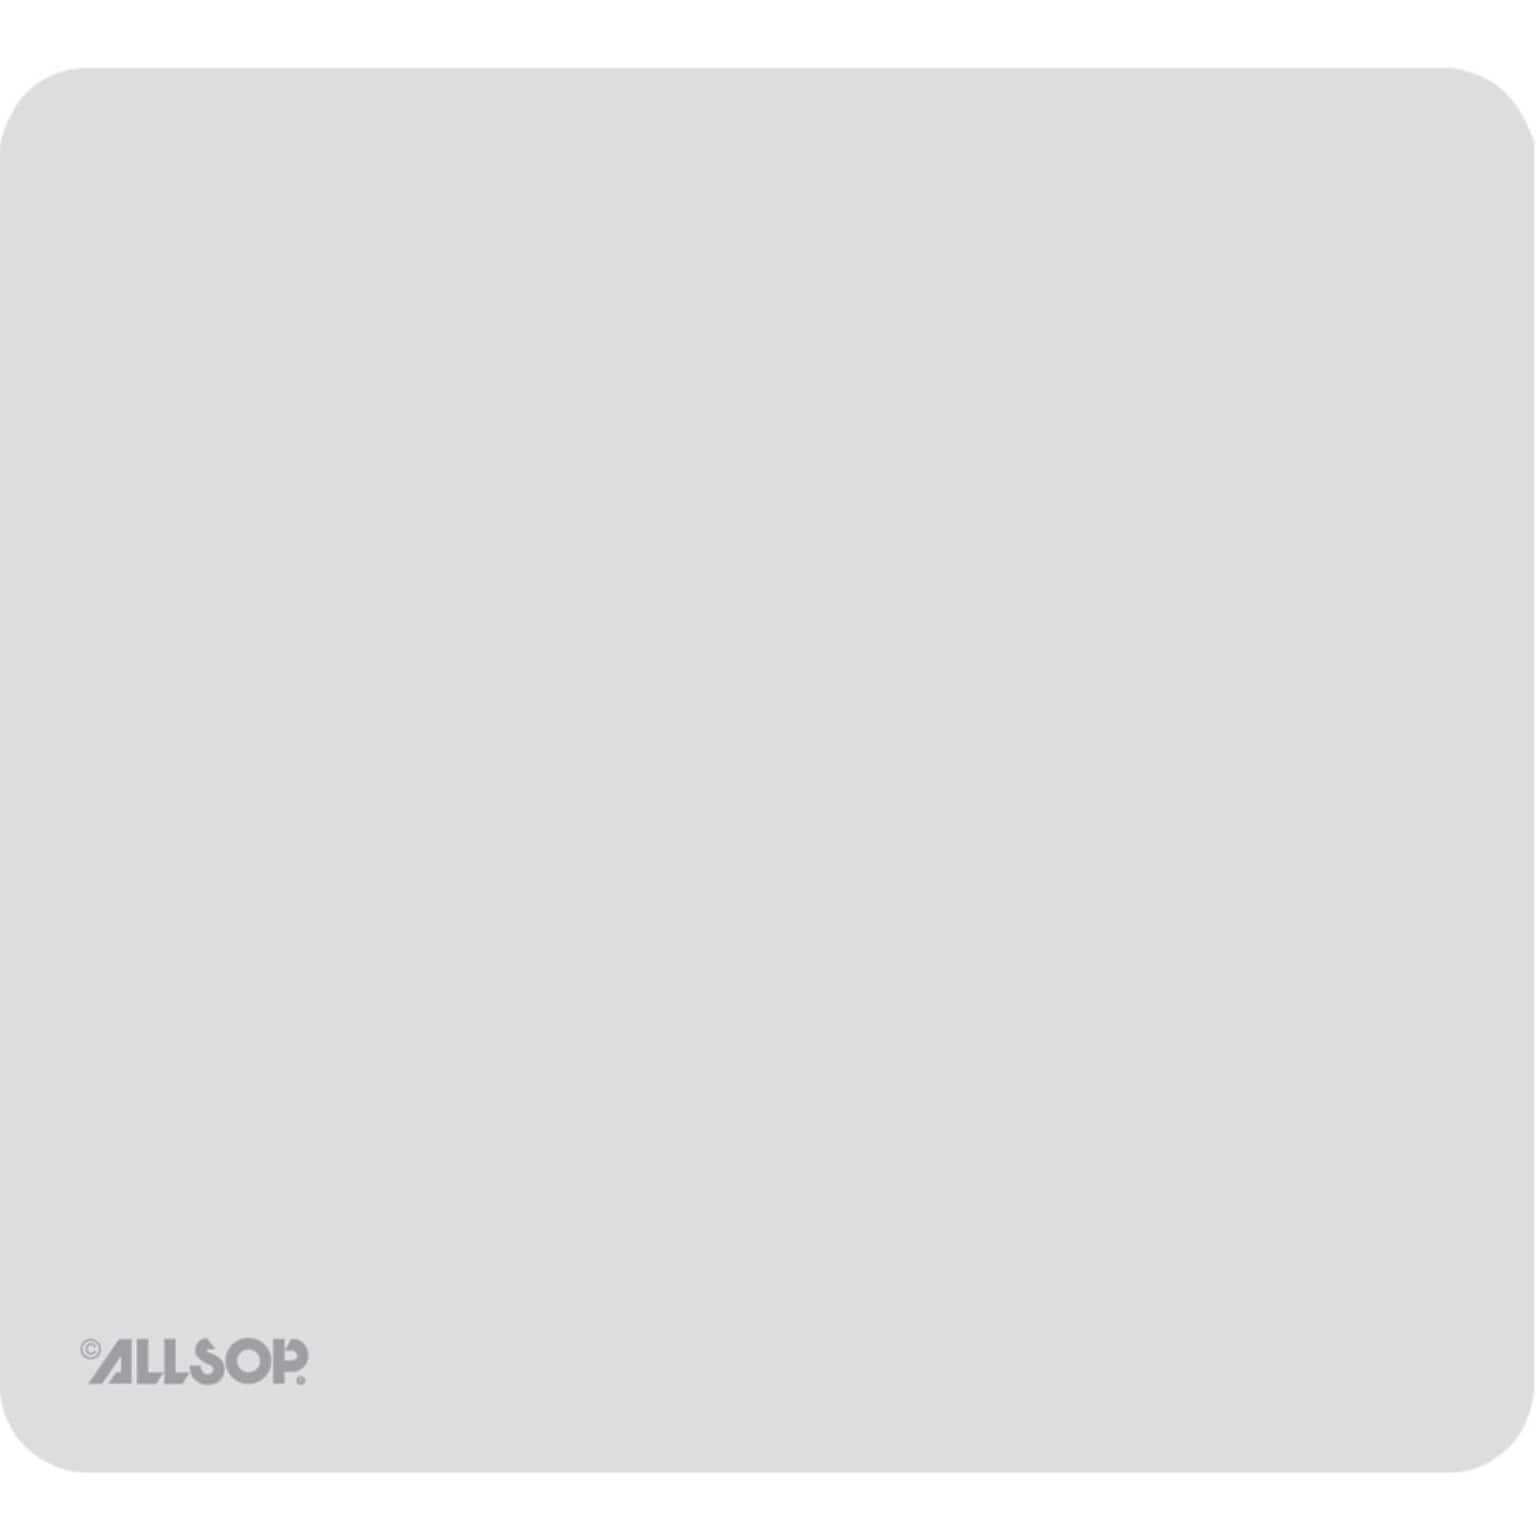 Allsop Accutrackpad Mouse Pad, Silver (30202)